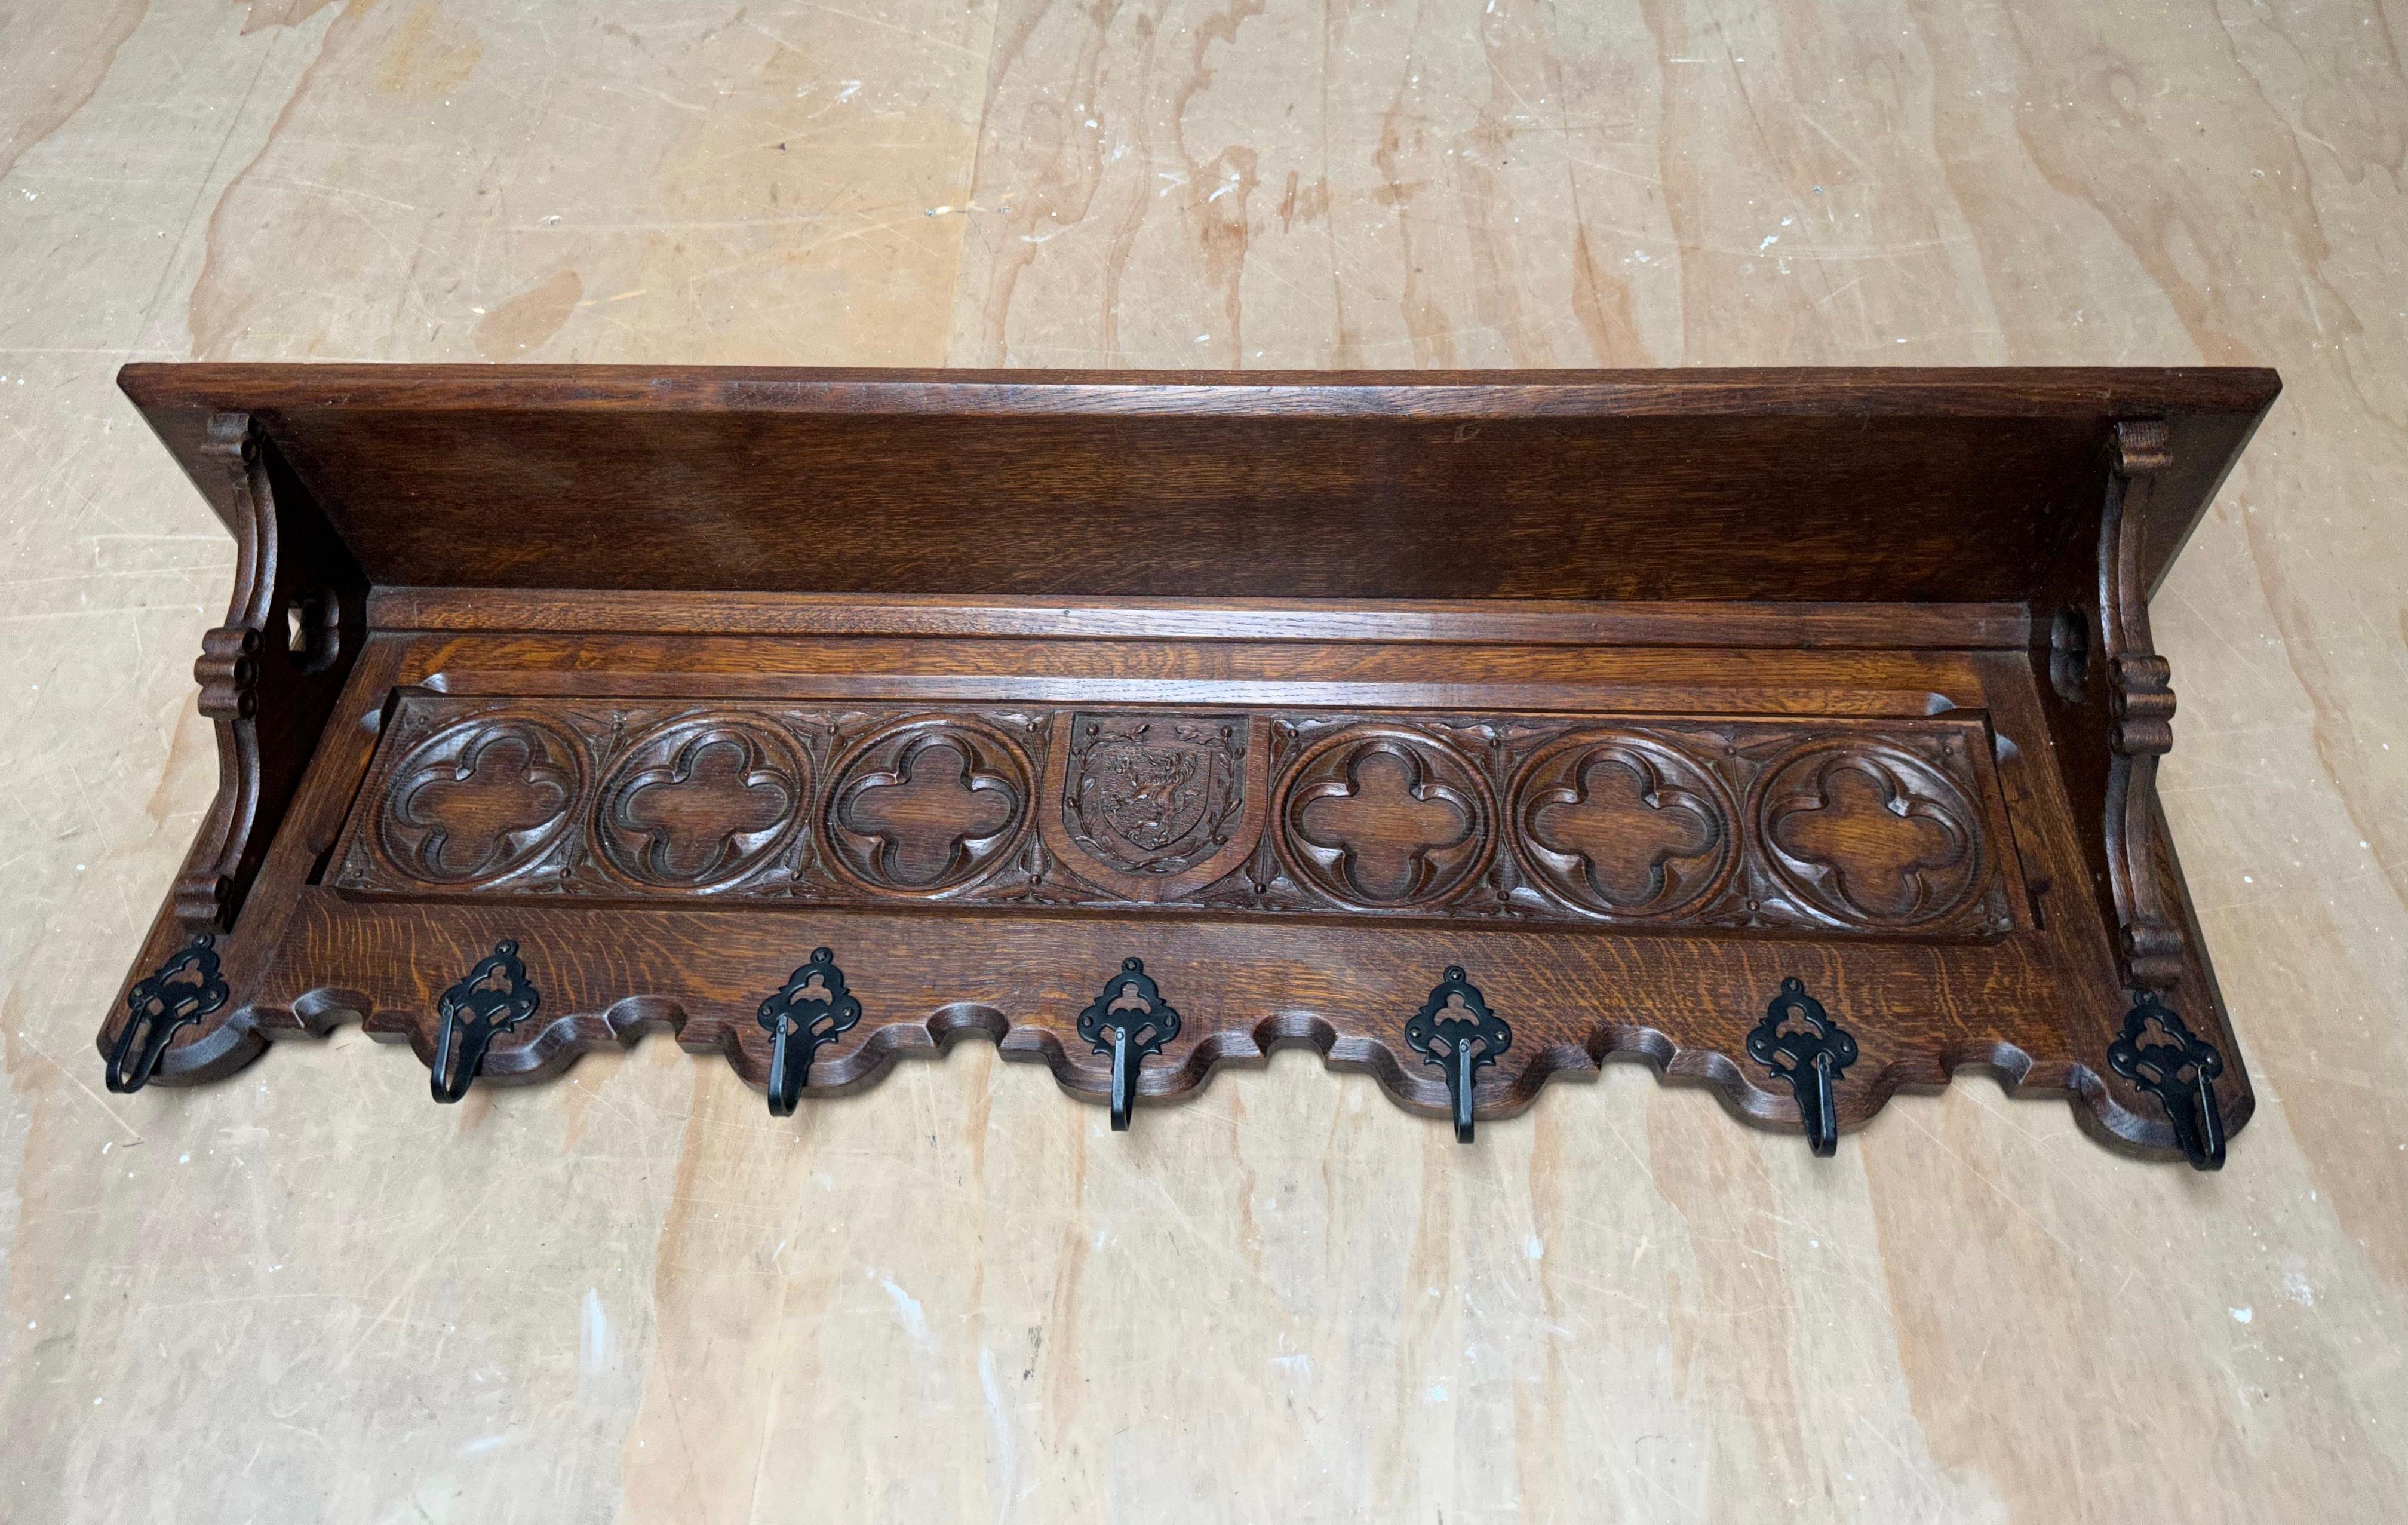 Wonderful craftsmanship, solid tiger oak Gothic Revival coat-rack.

Anyone who has ever visited a Gothic (Revival) church or other Gothic style building will immediately recognize the many of the same elements in this hand carved coat rack. The